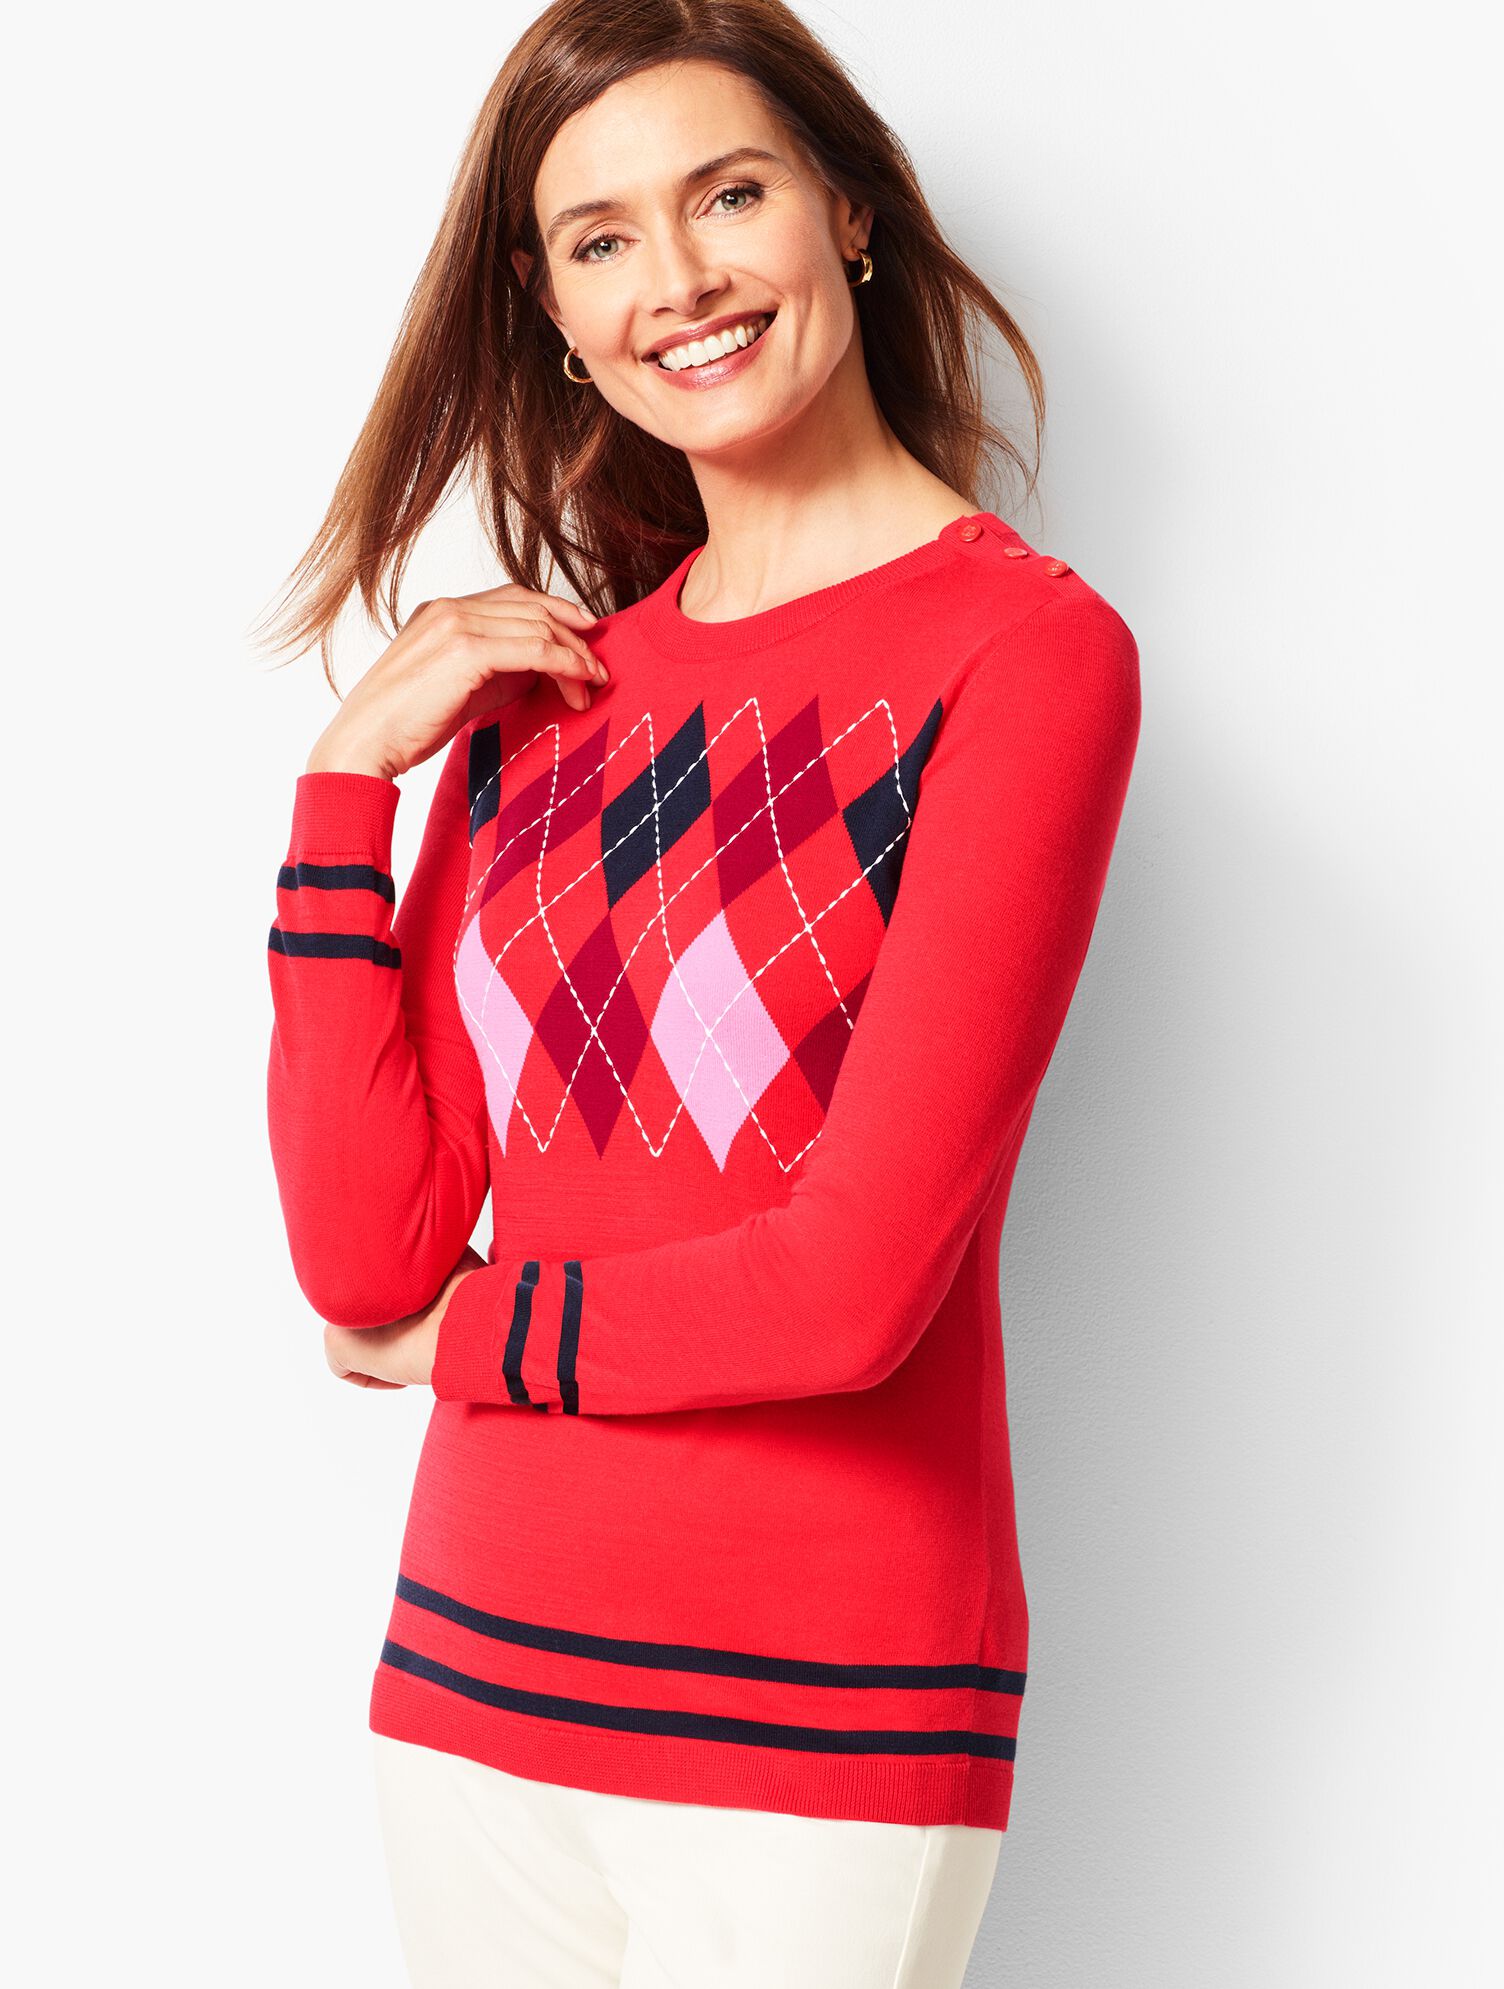 Classic Large-Print Argyle Sweater Tights